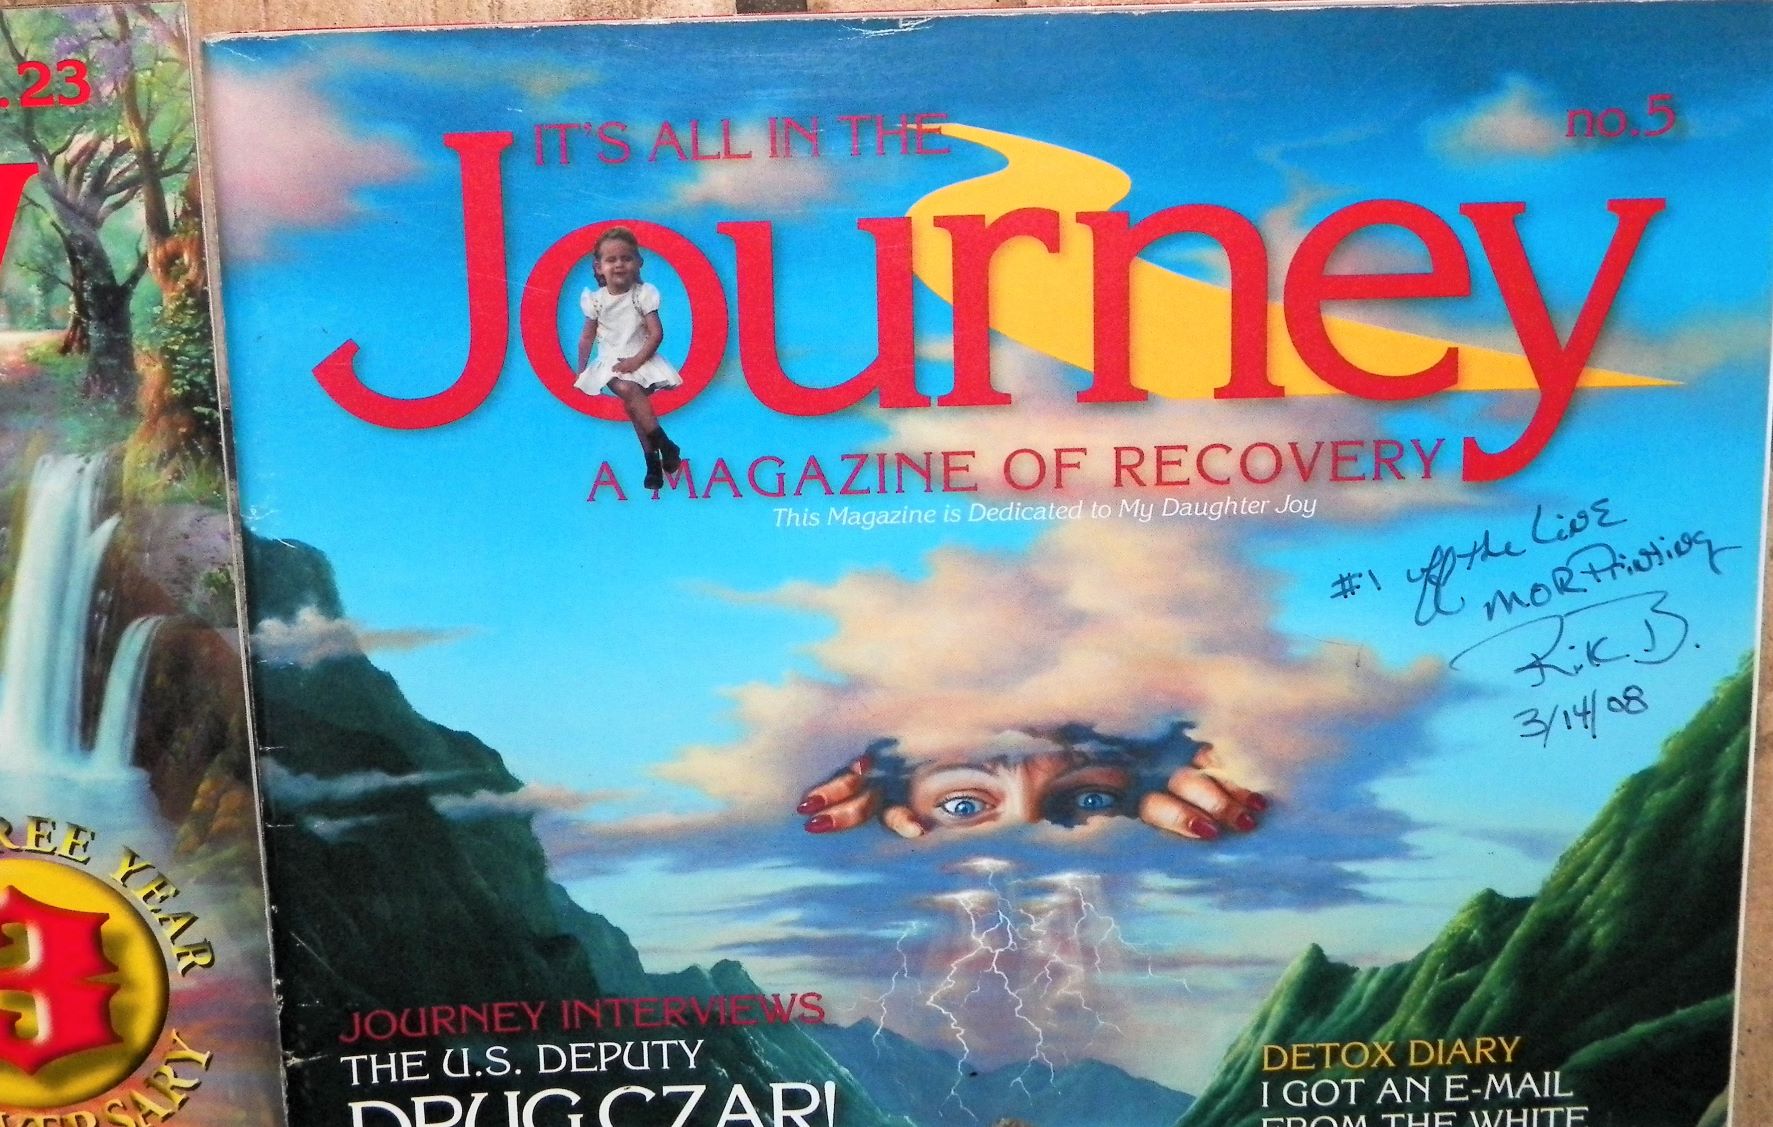 COLLECTIBLE MAGAZINE JOURNEY COVERS A GROUP 5AAA.JPG